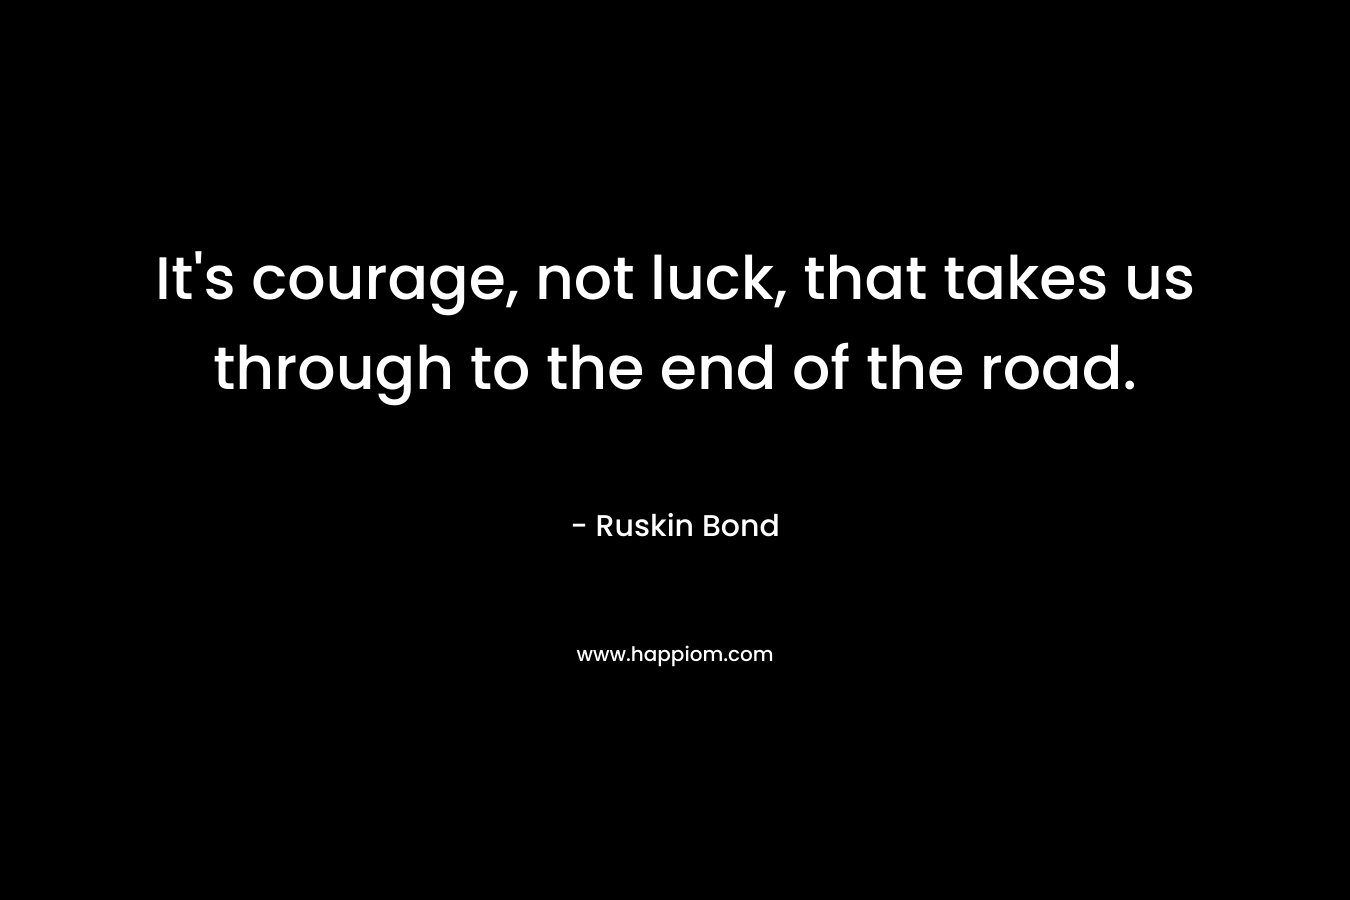 It’s courage, not luck, that takes us through to the end of the road. – Ruskin Bond